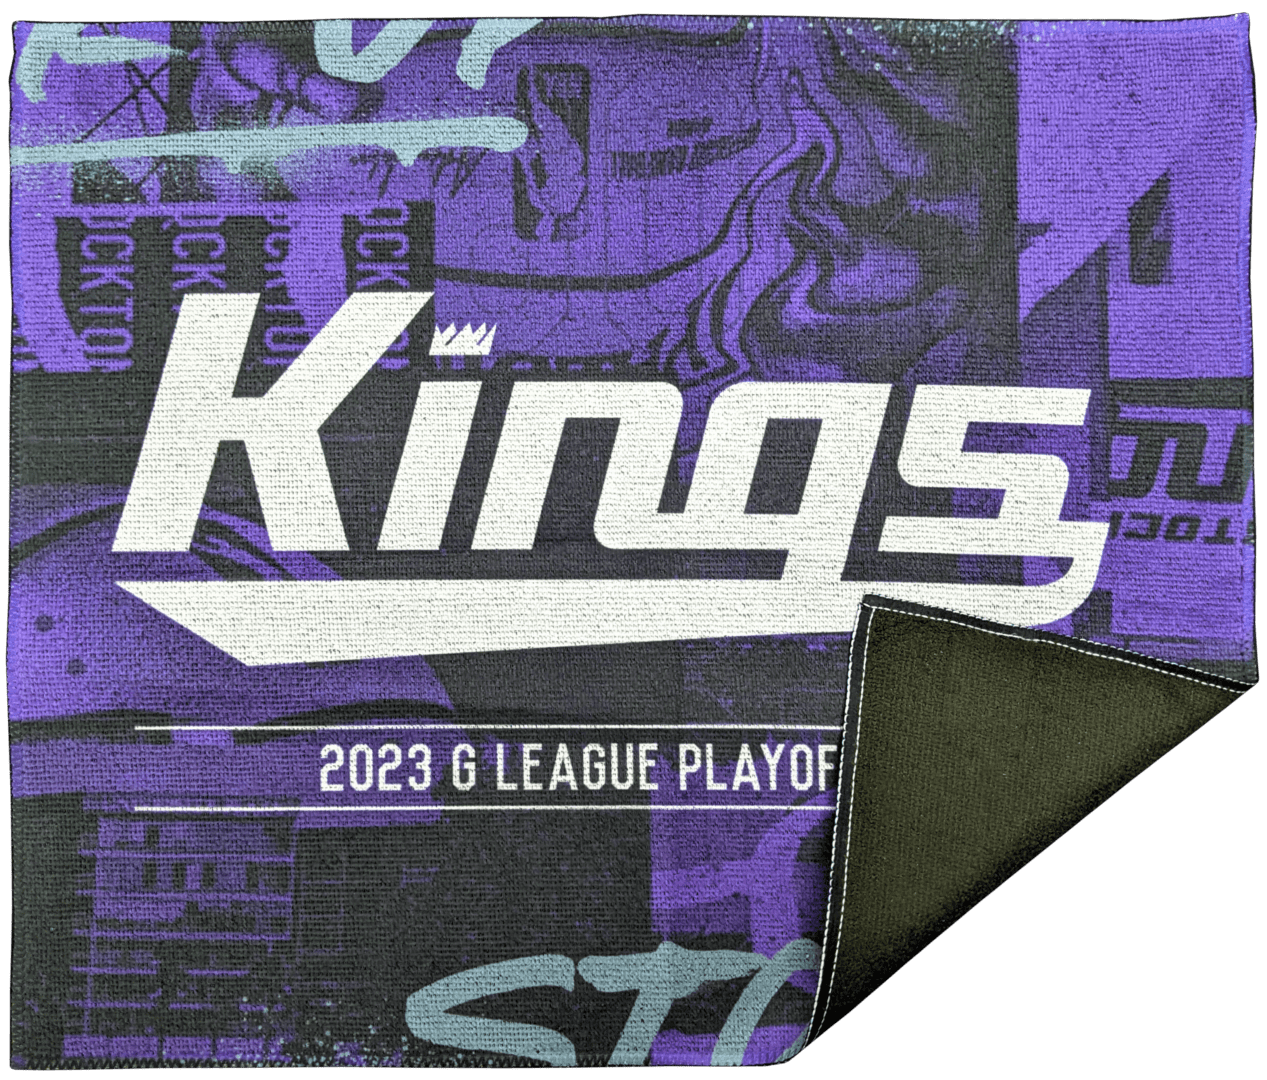 Kings 2023 league text printed on a cloth